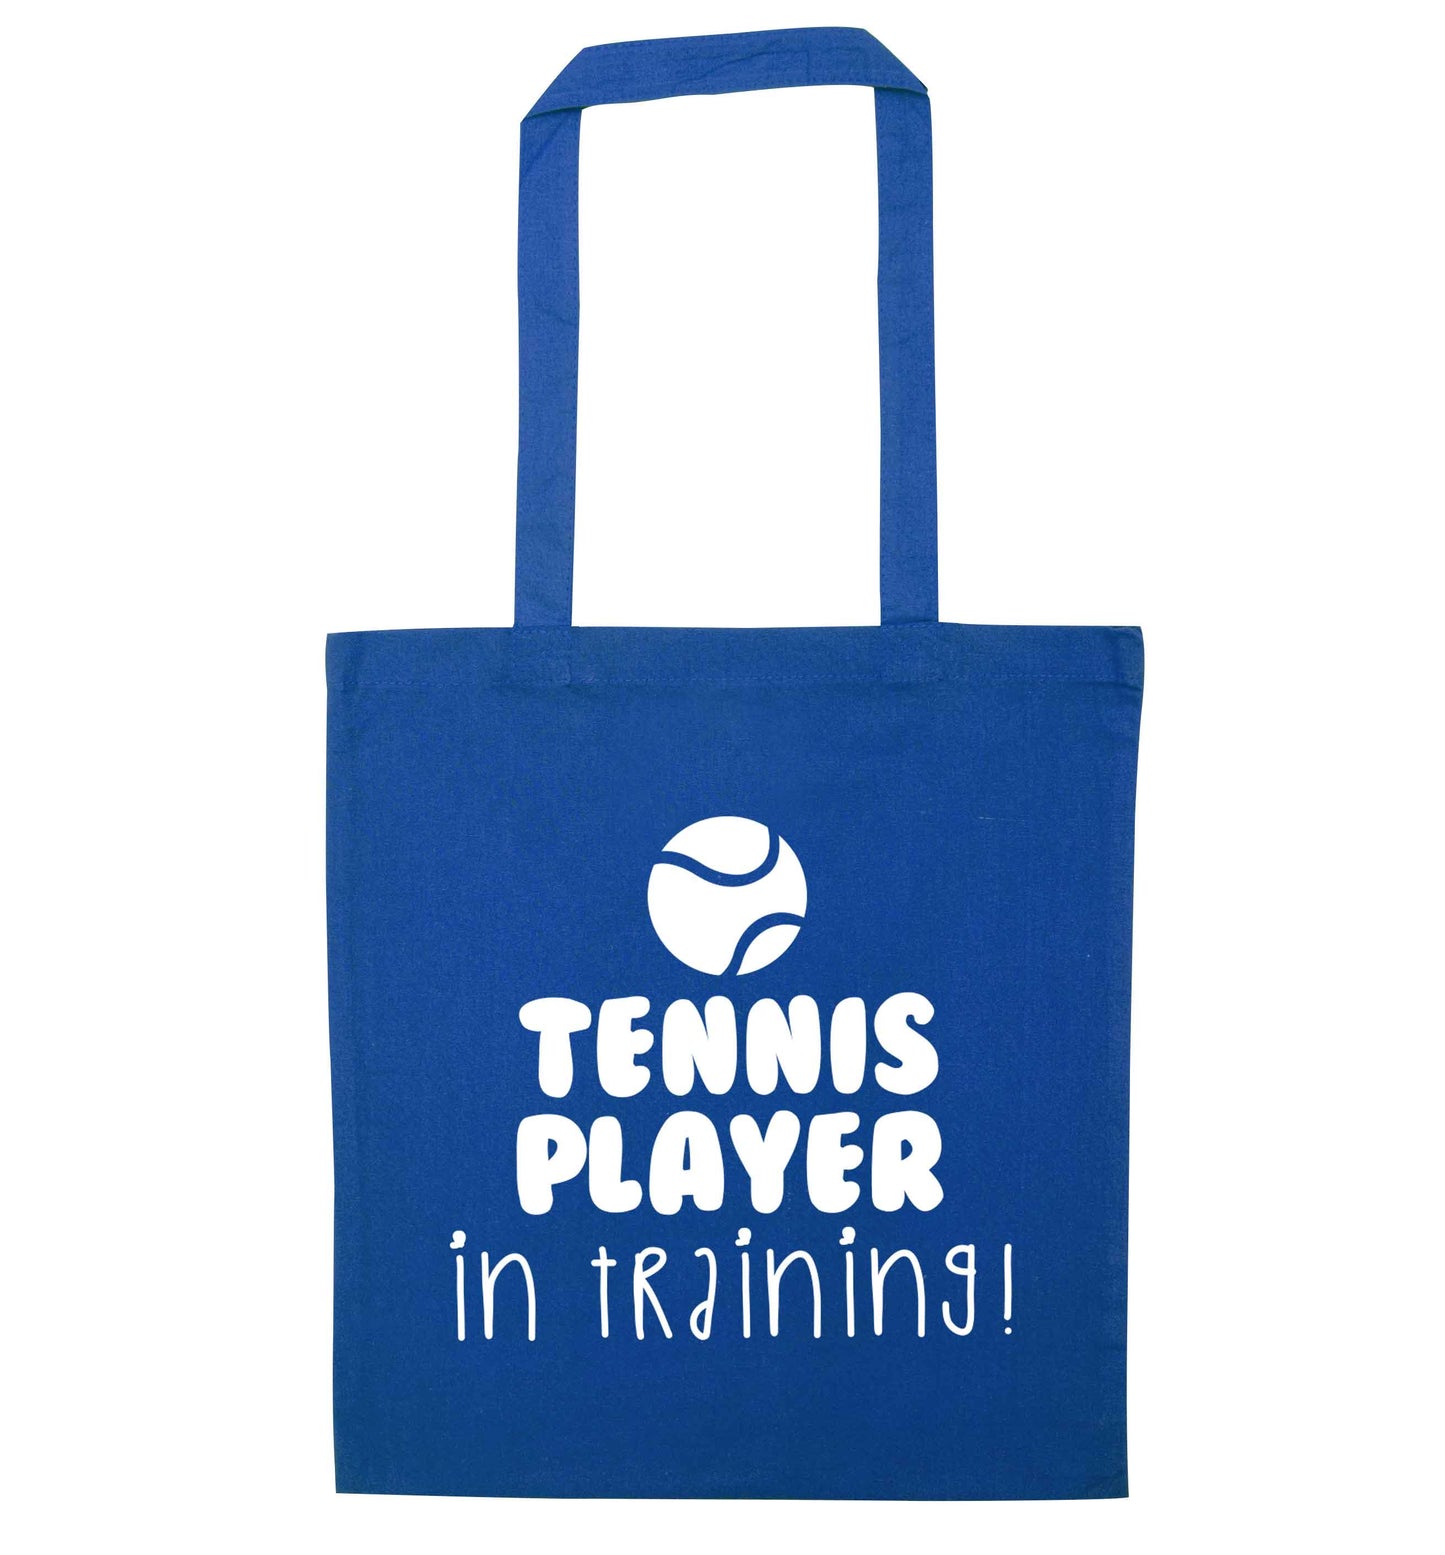 Tennis player in training blue tote bag